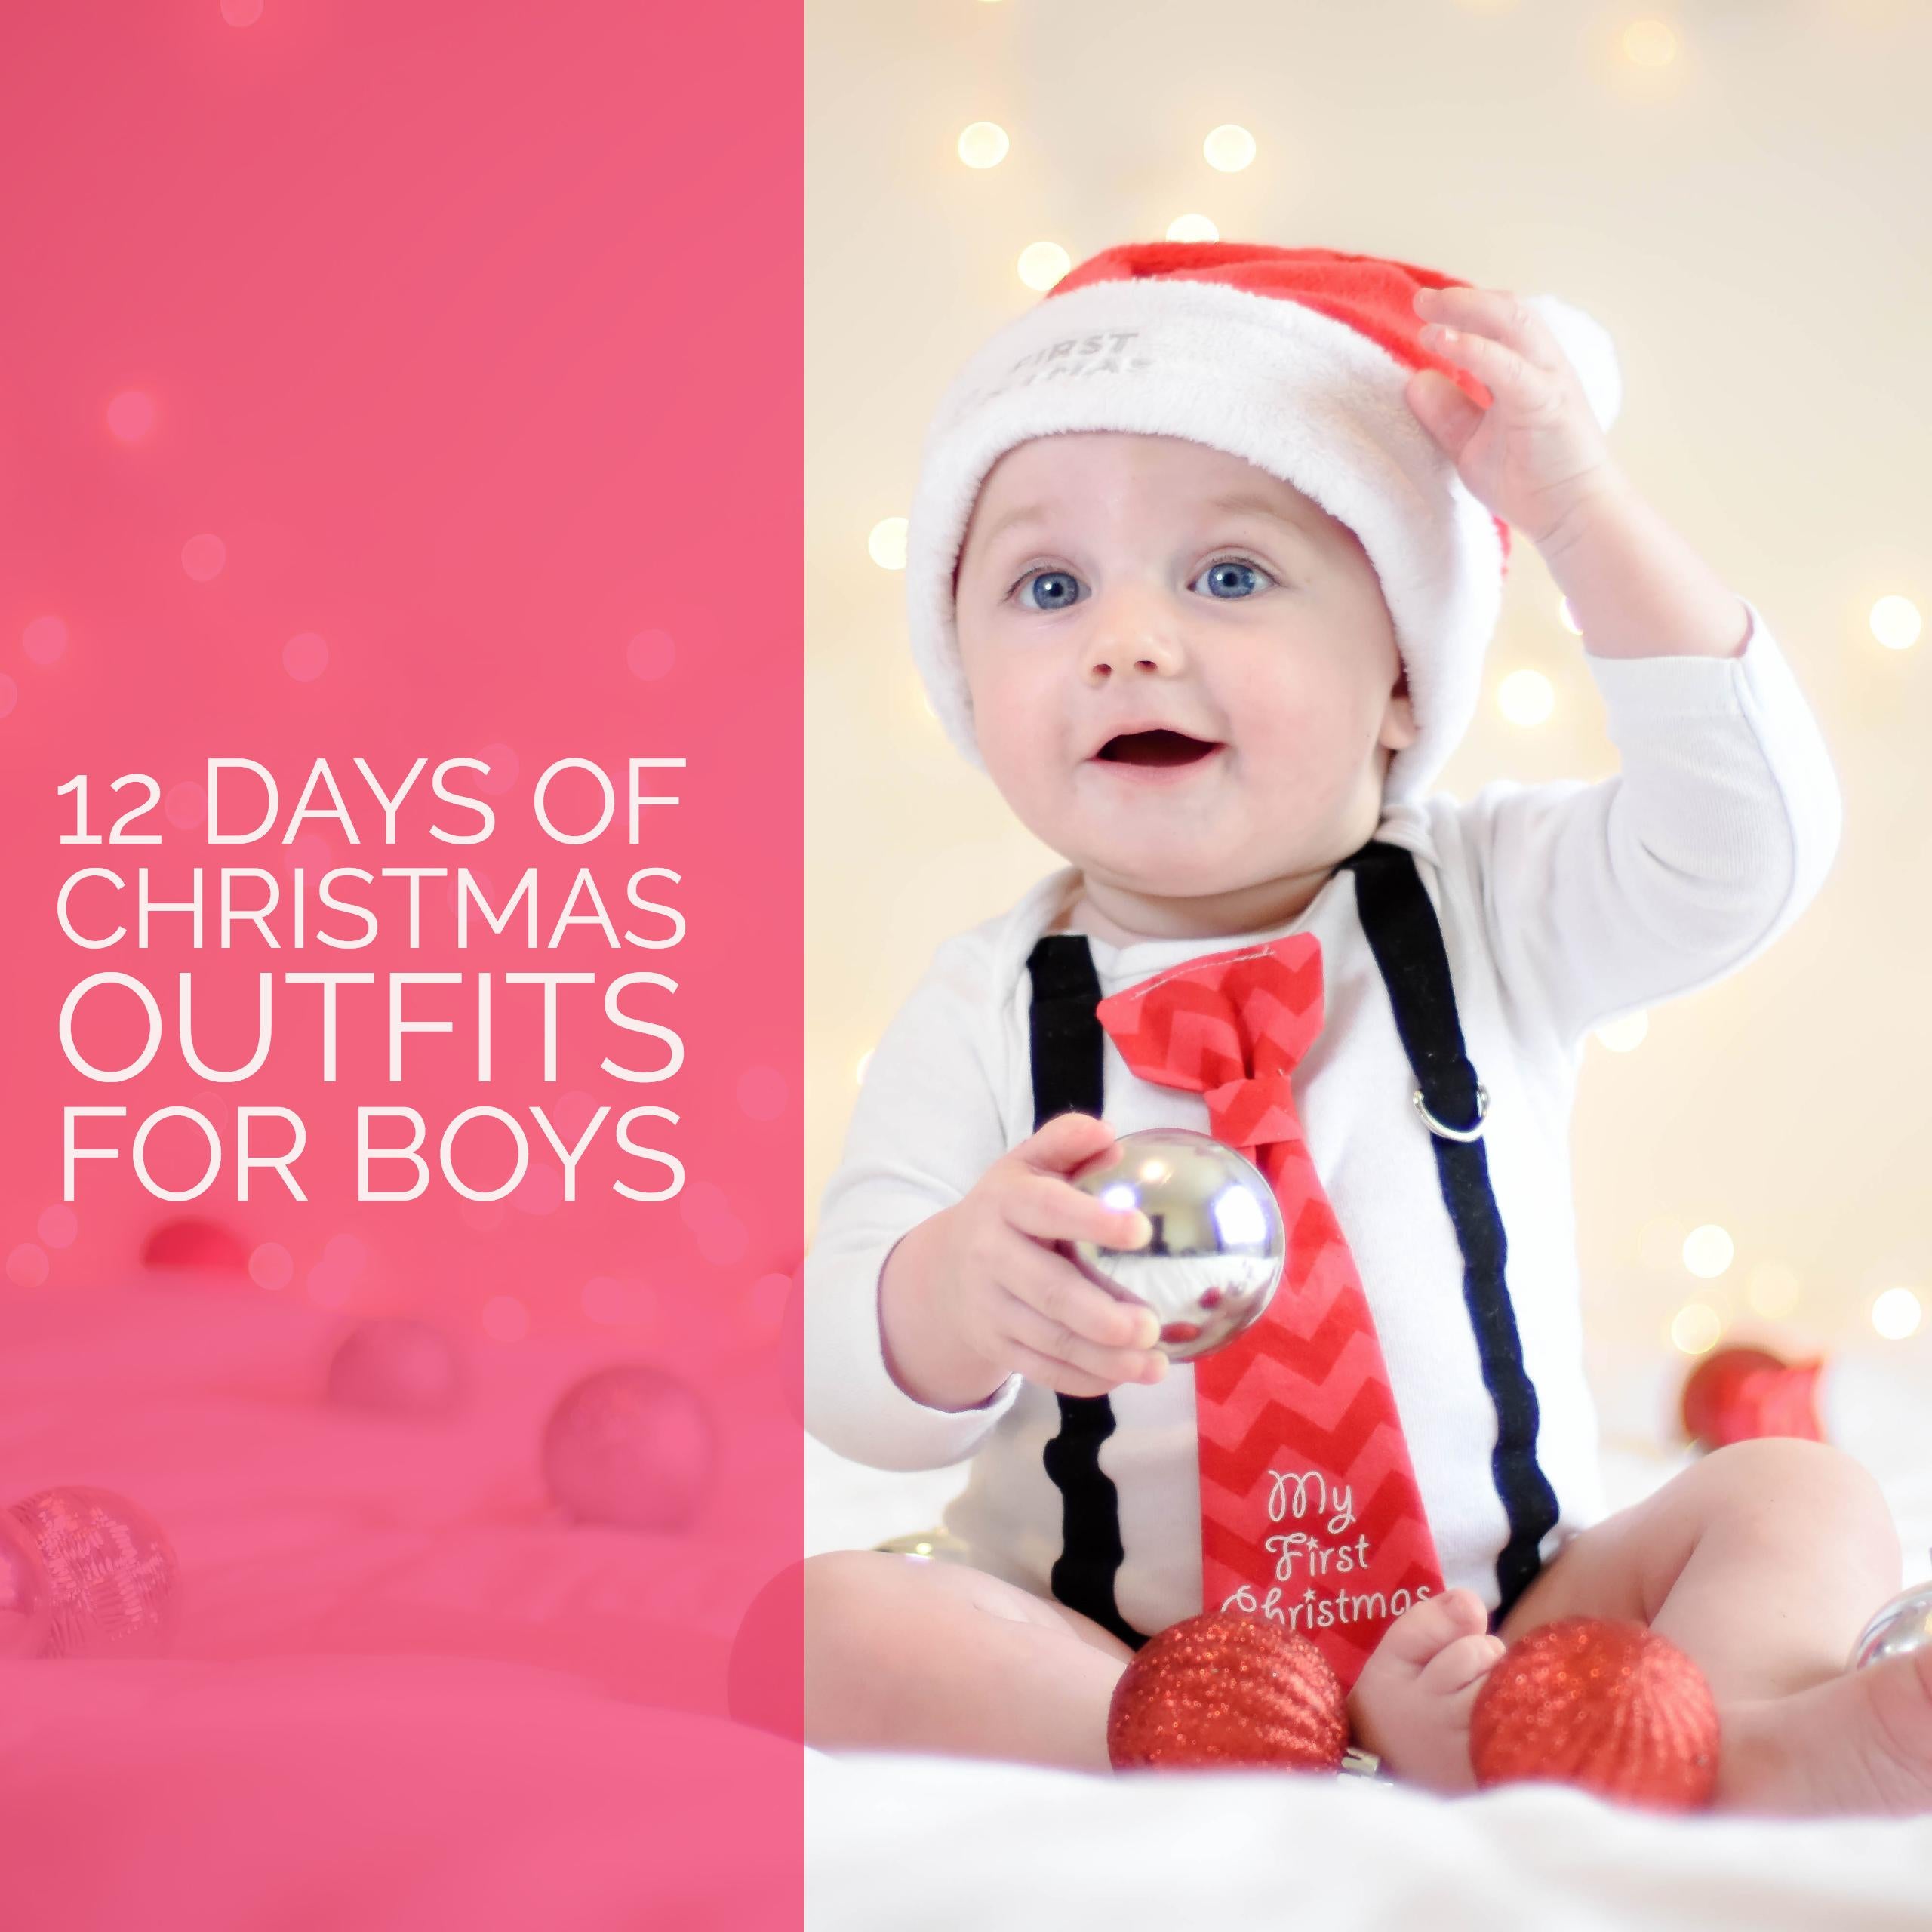 12 days of christmas outfits for boys